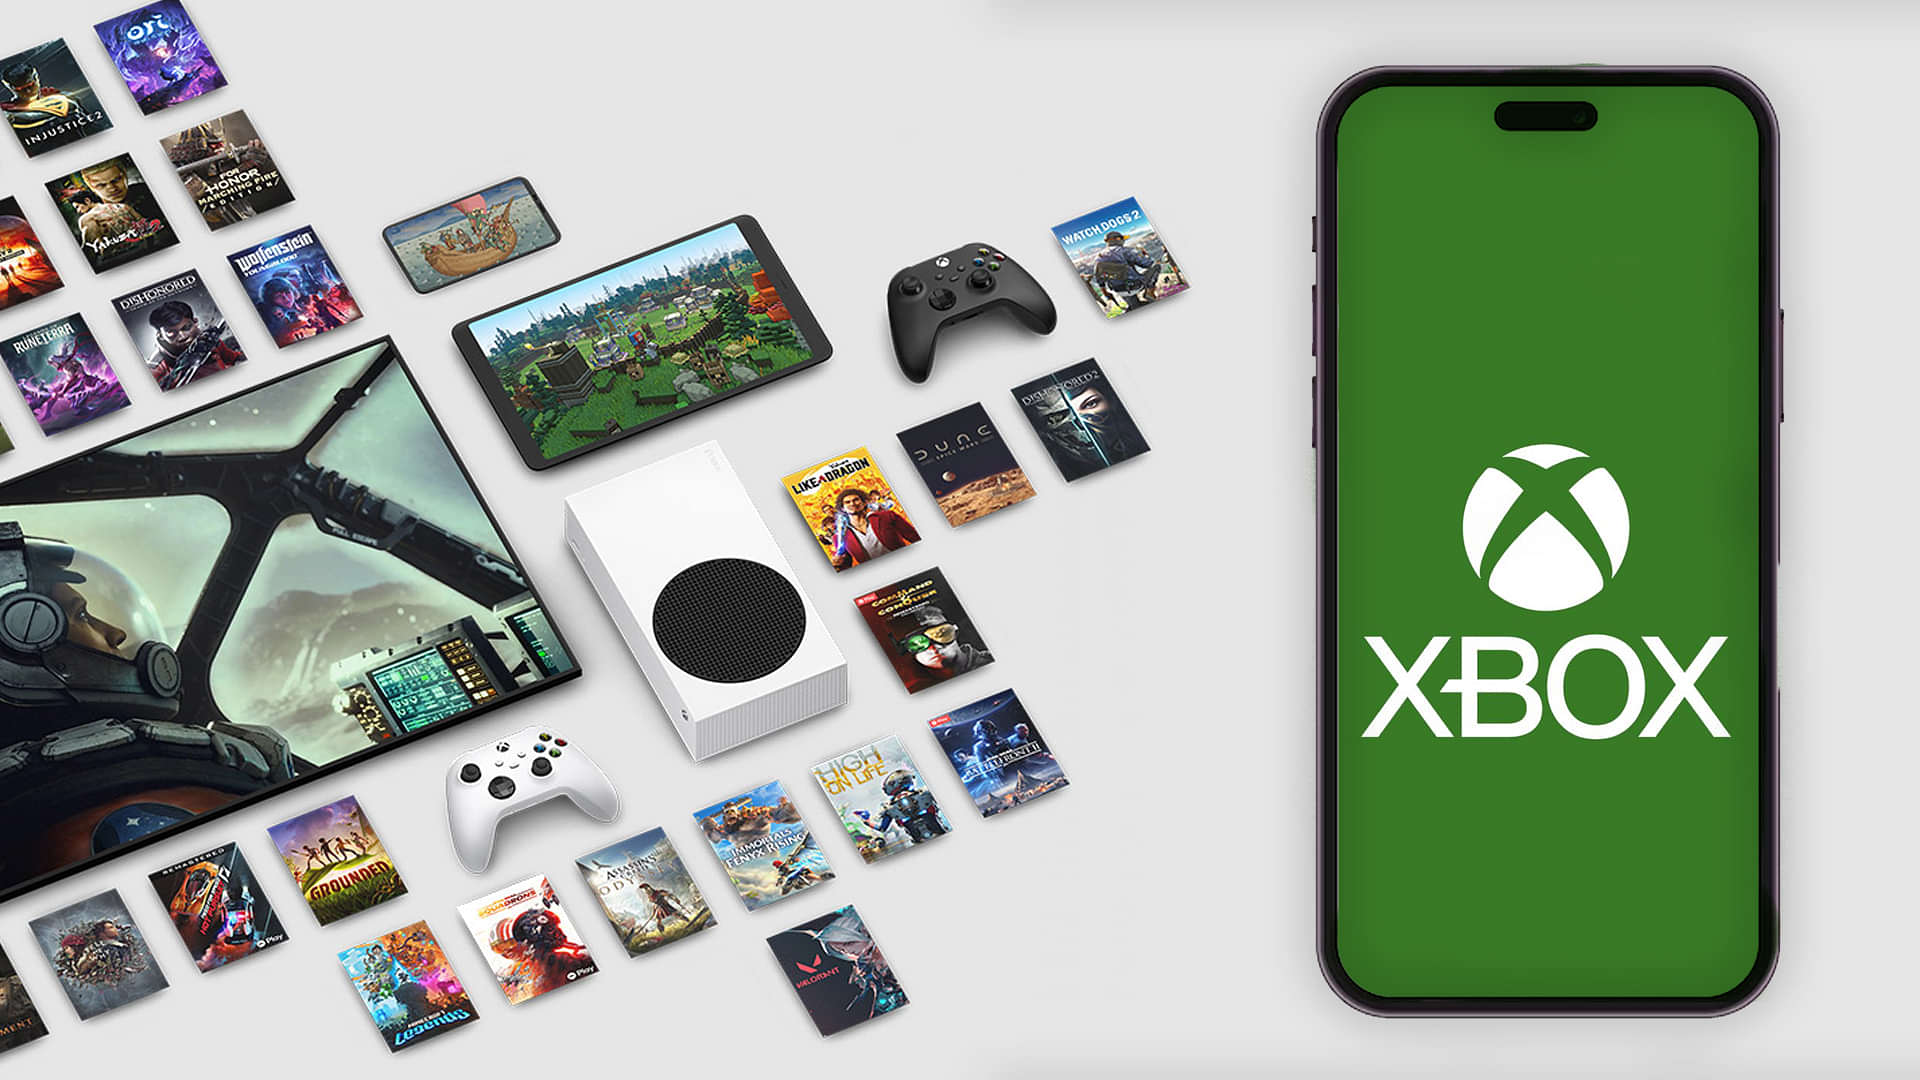 Microsoft is in talks with partners about launching an Xbox mobile